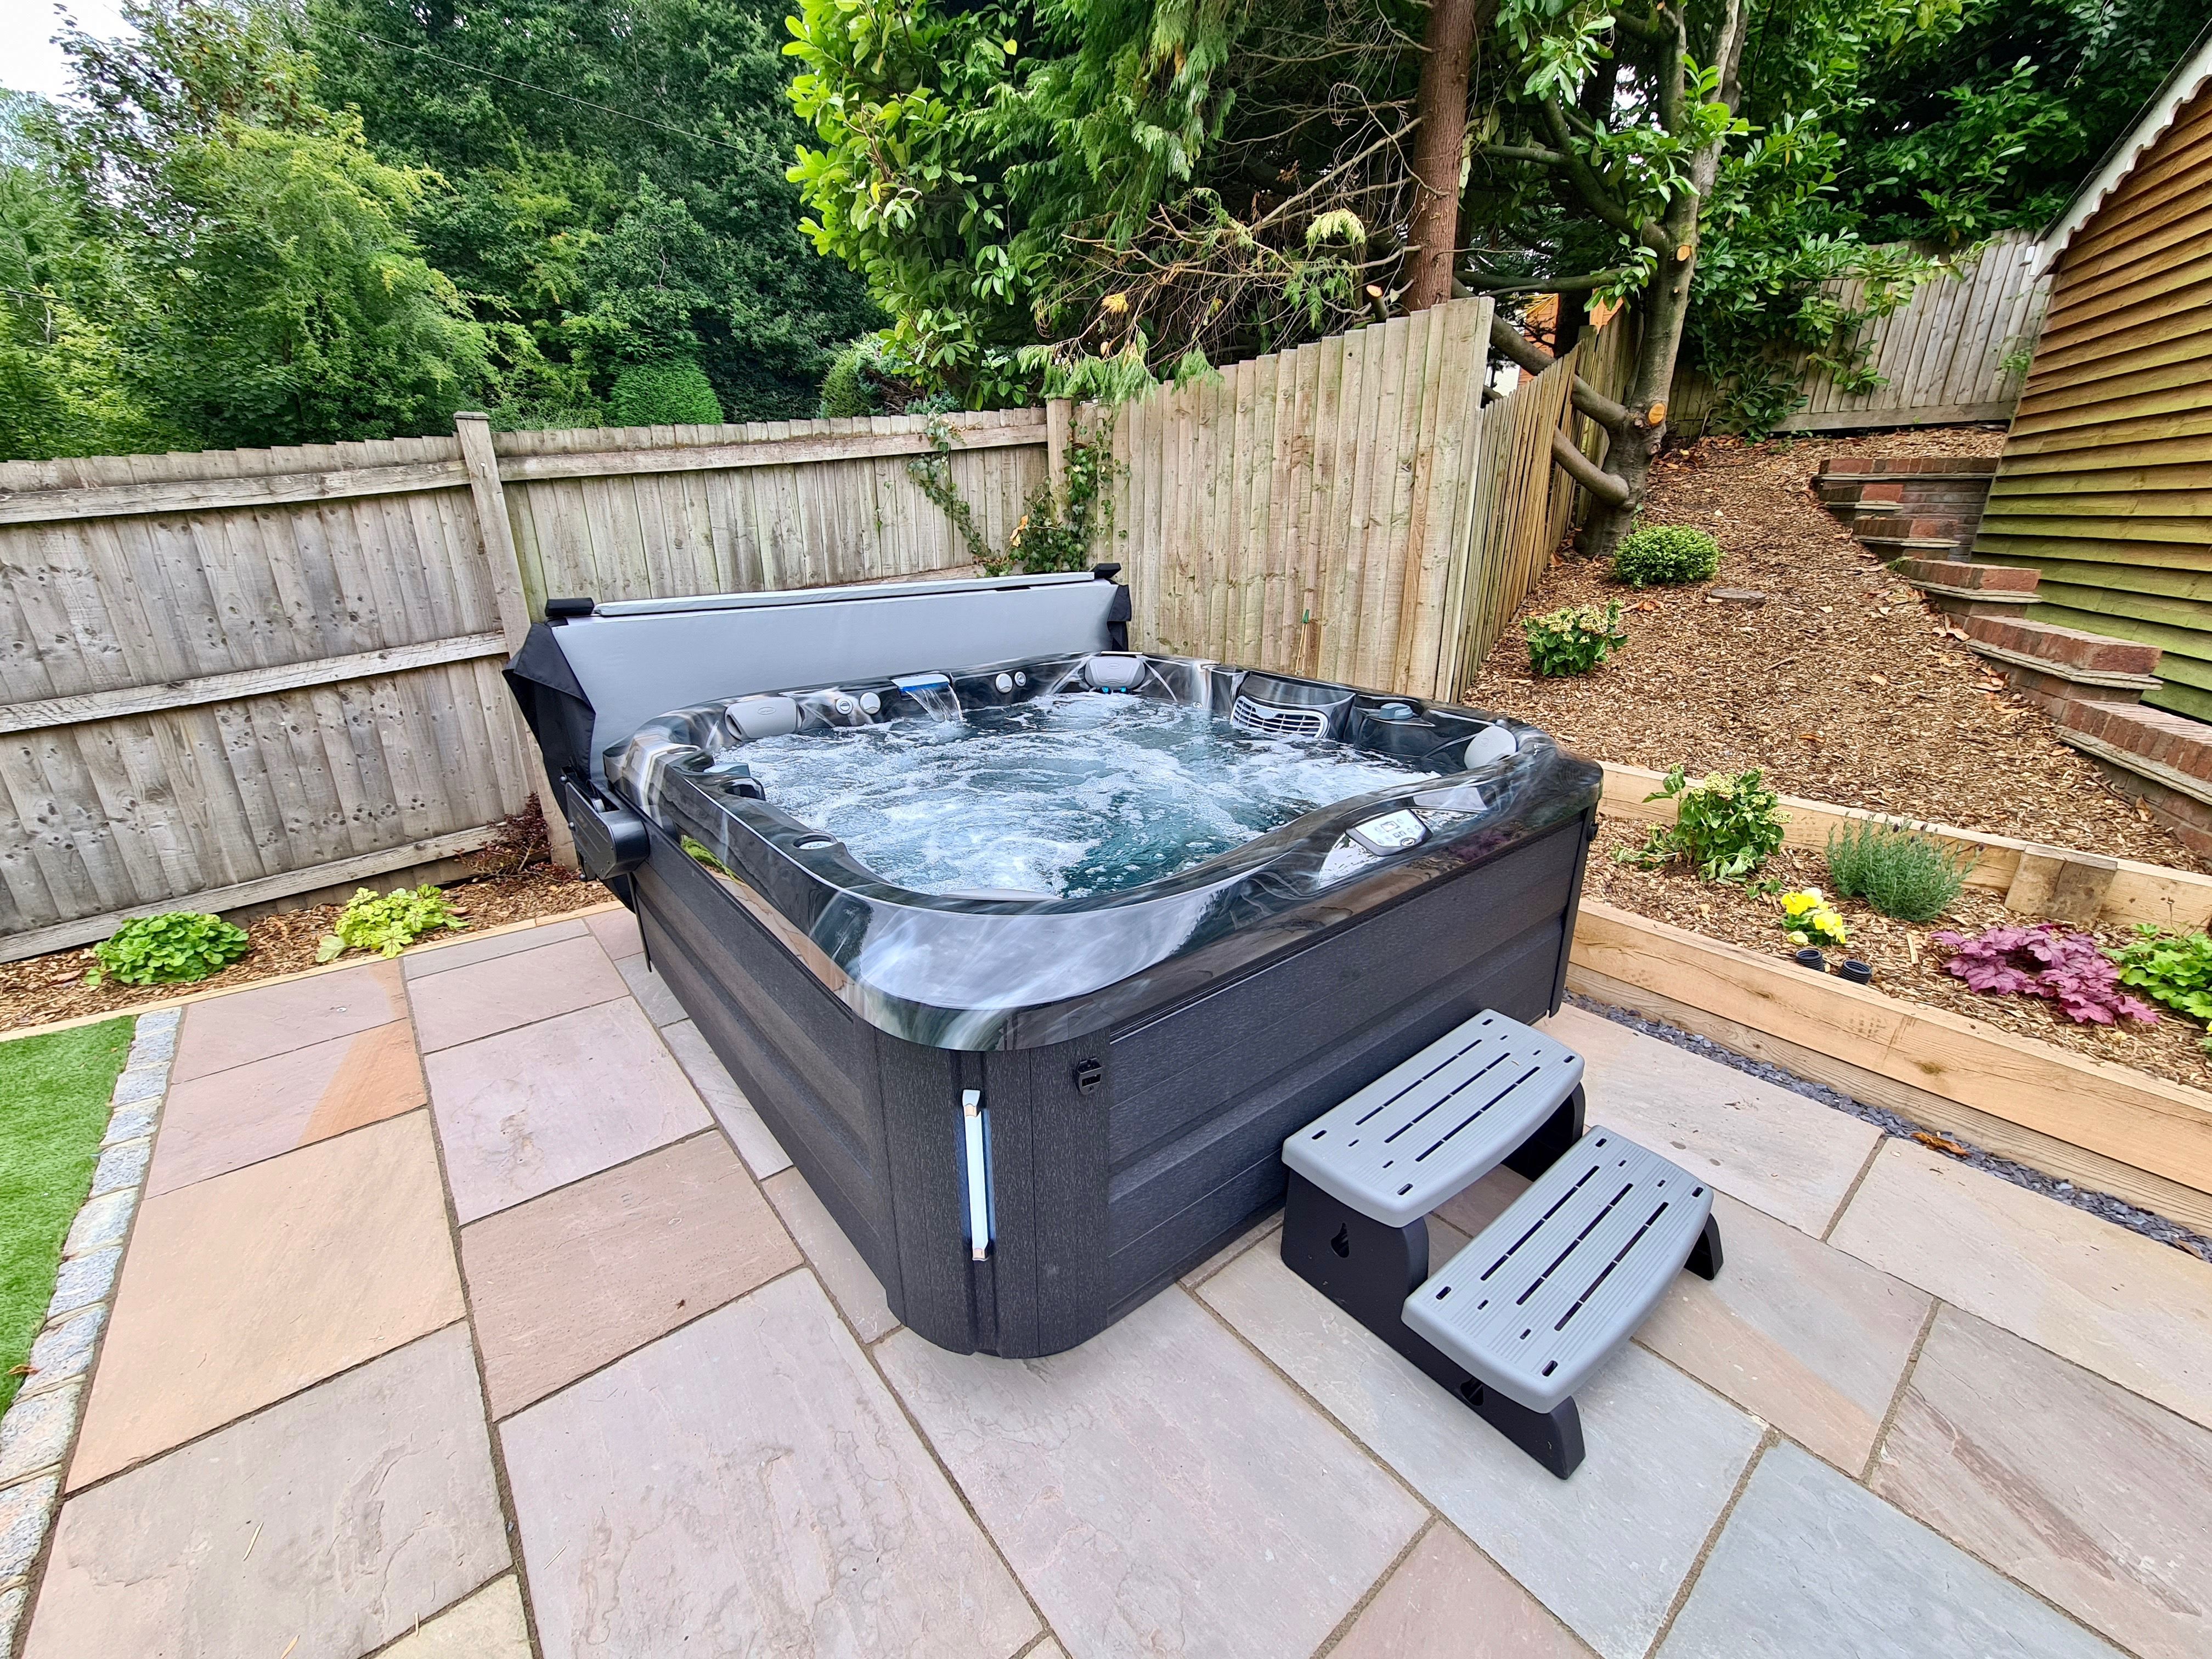 Take a look around the Jacuzzi® J375